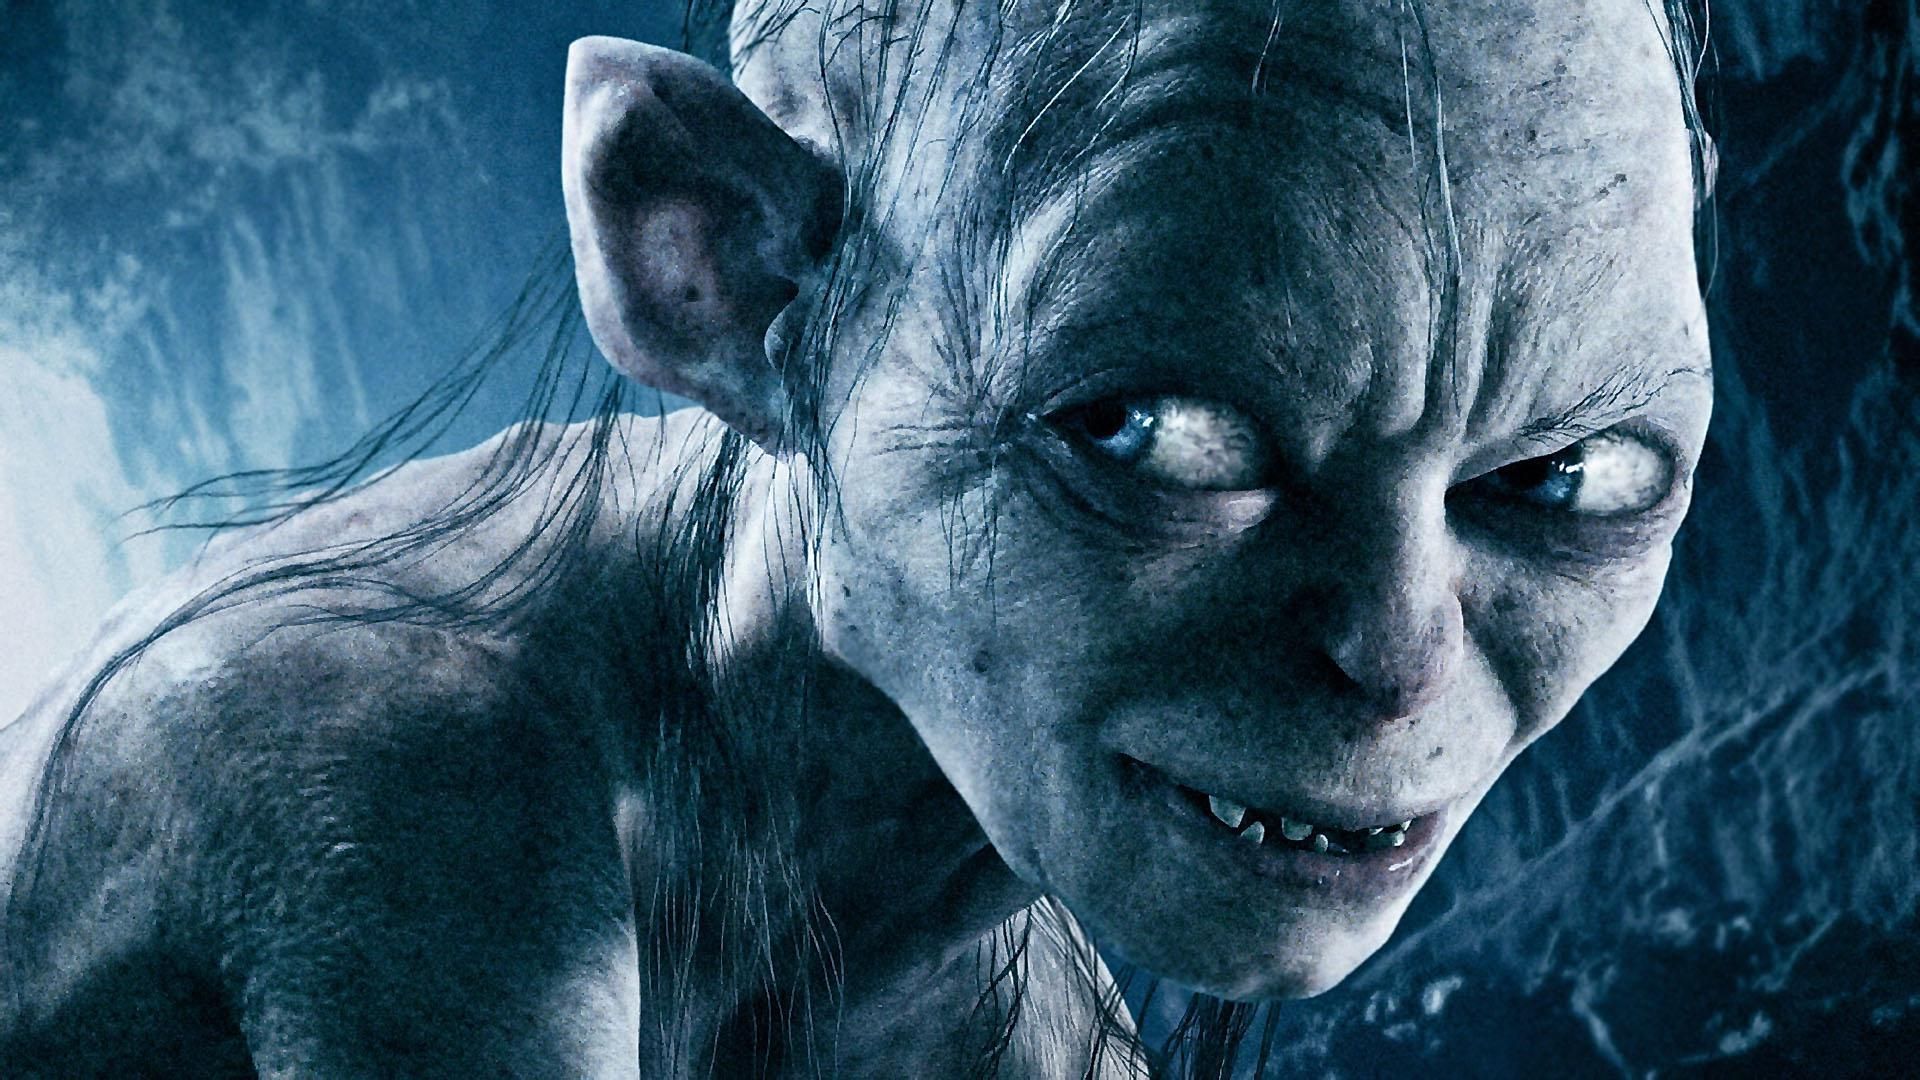 Gollum in Lord of the Rings smiling in a dark cave